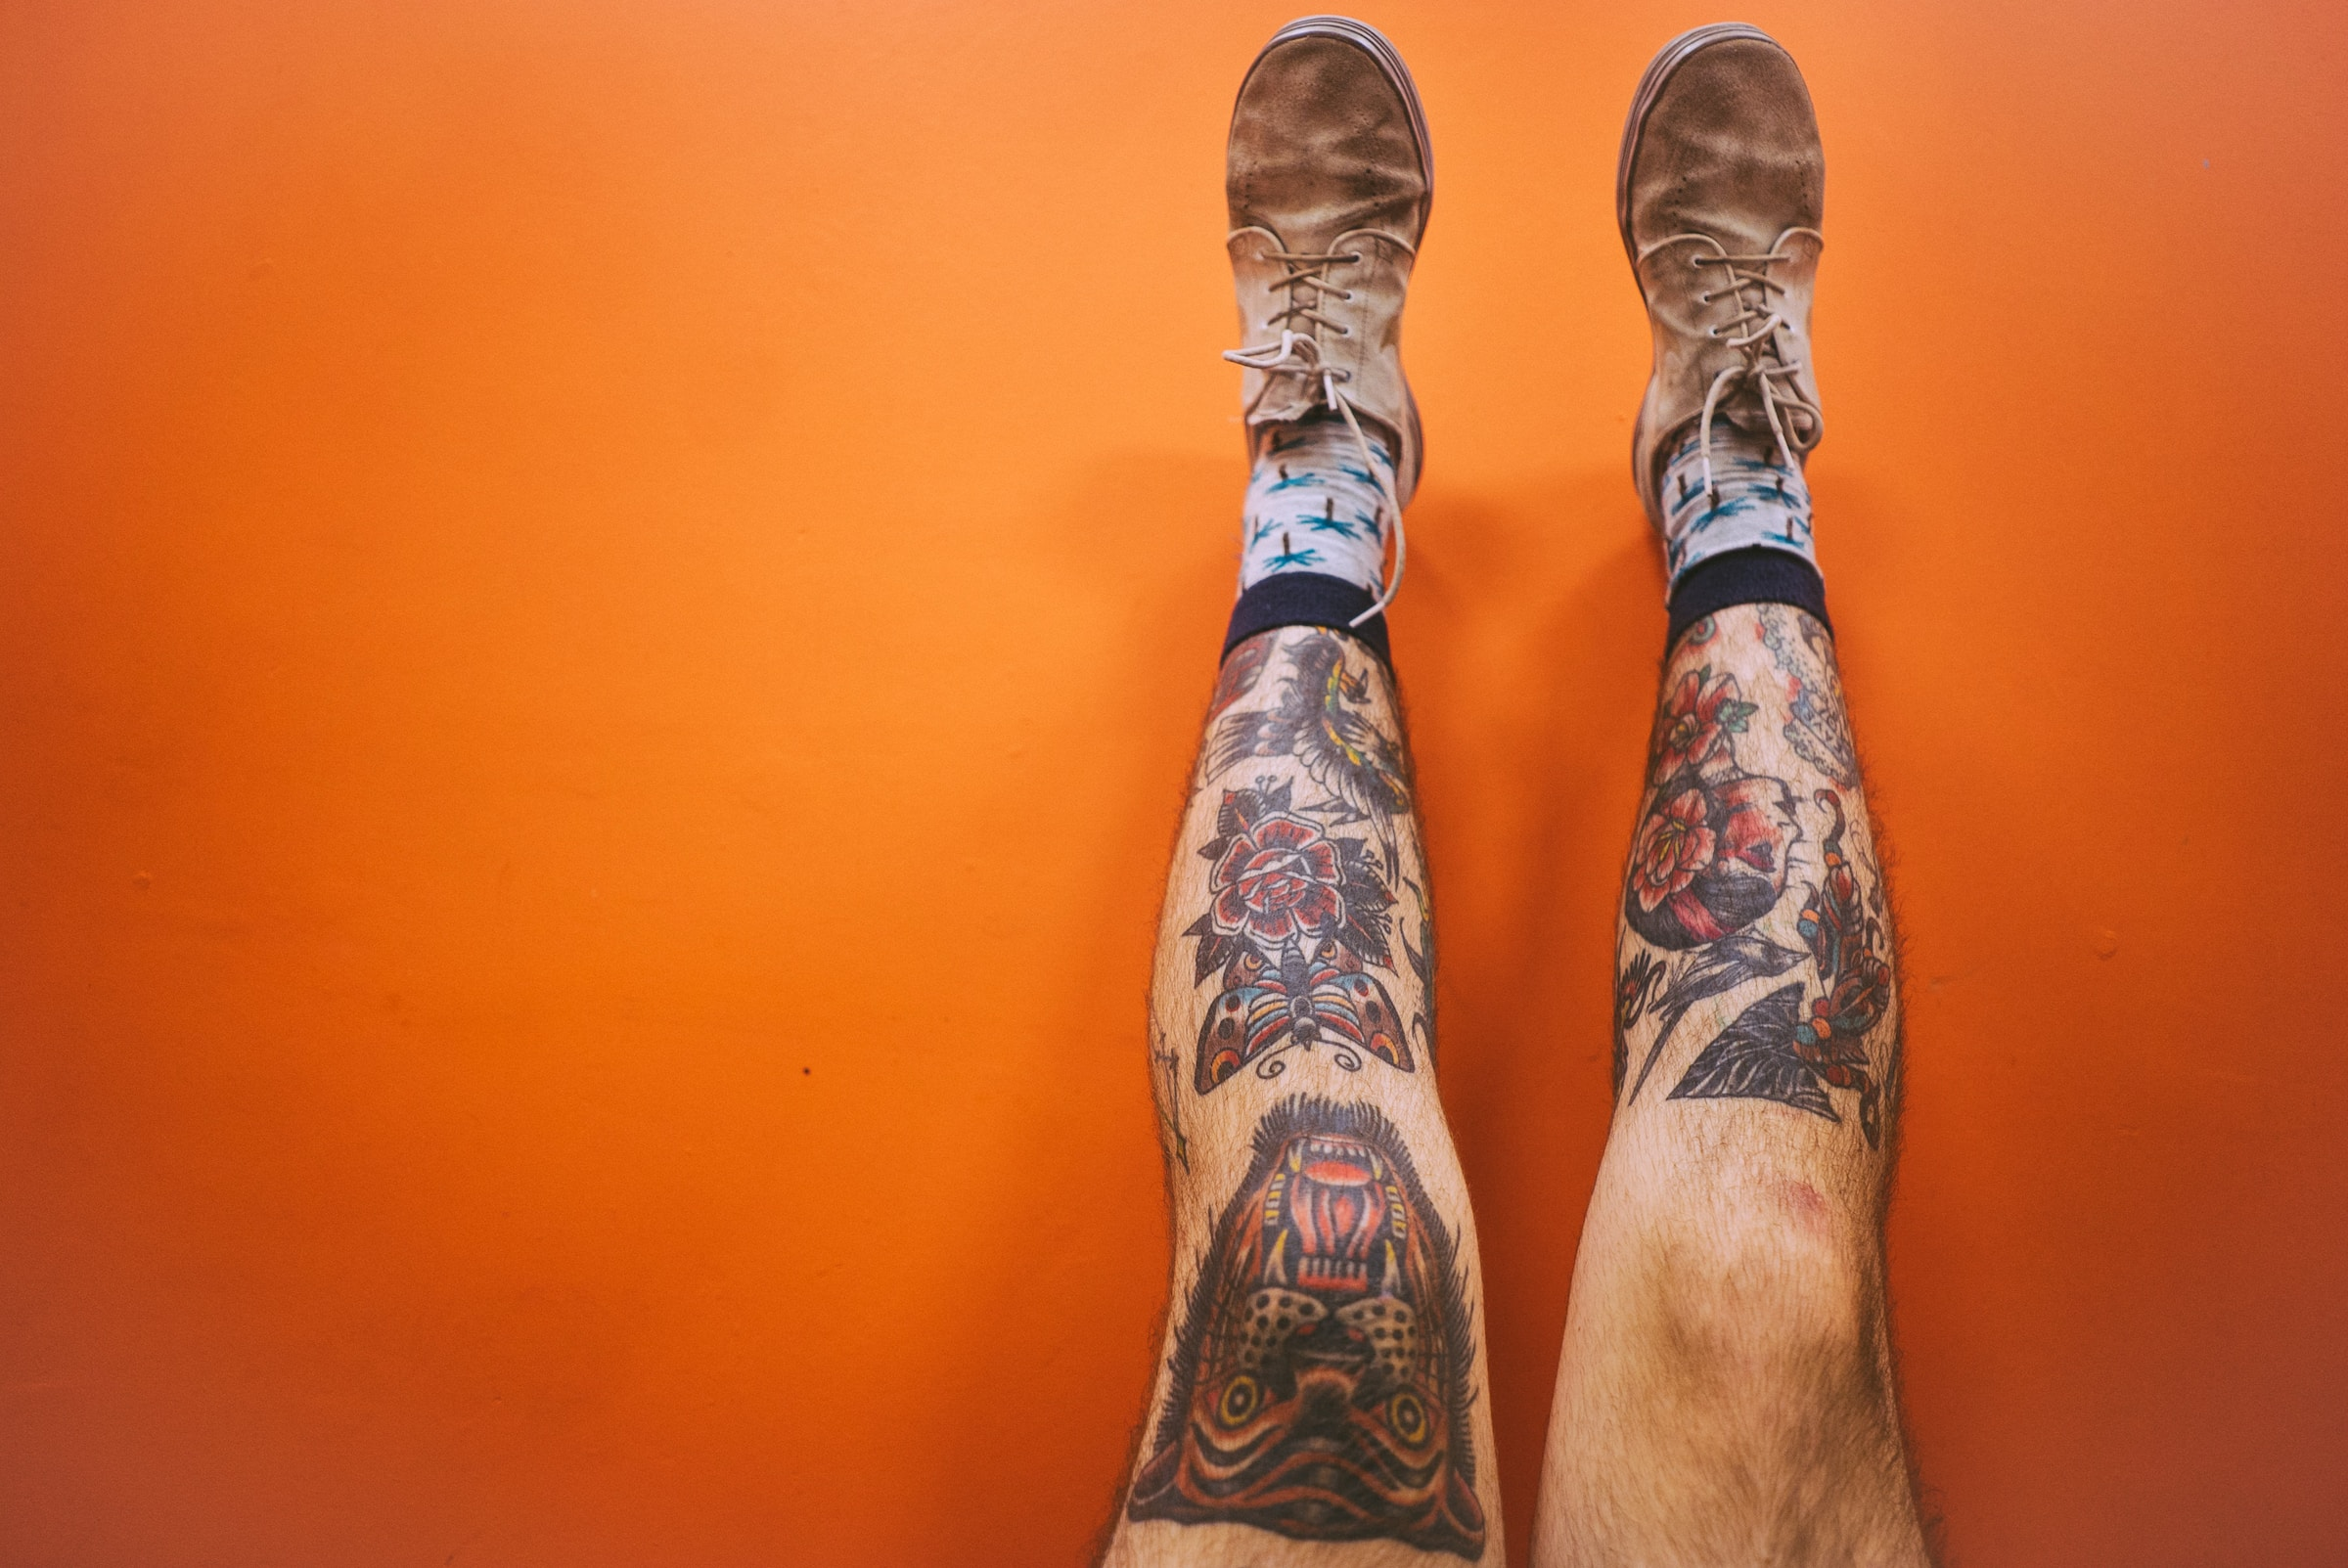 Most Shin Tattoos are Colorful